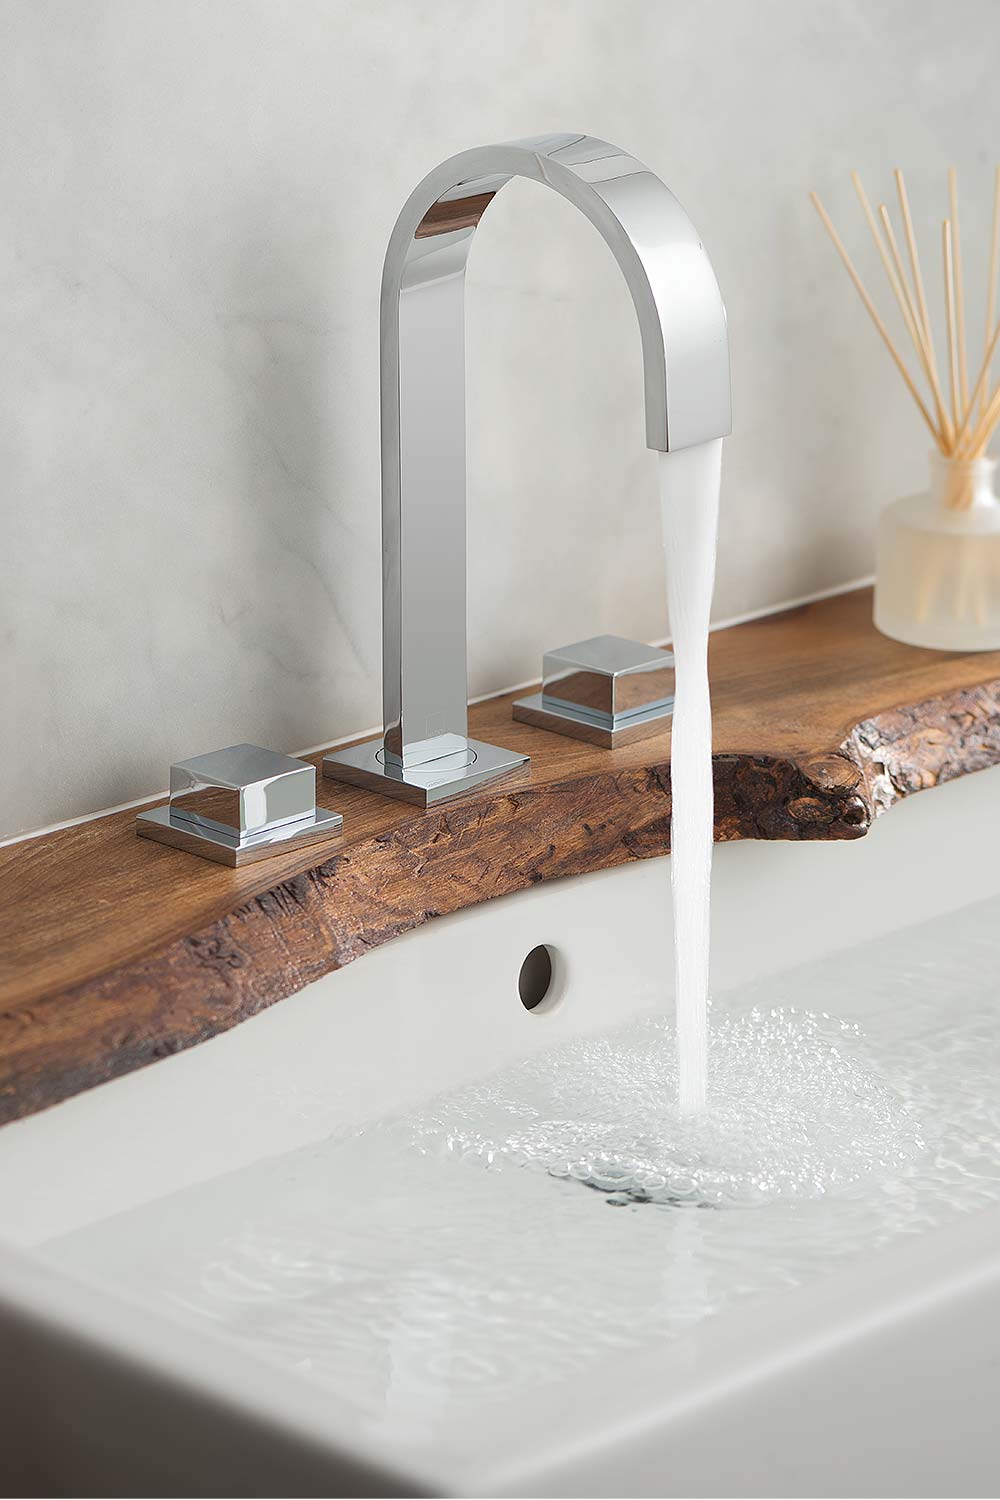 Modern three hole basin mixer with square handles and water flowing from the tall spout on a rough edge elm wood shelf over a white basin.